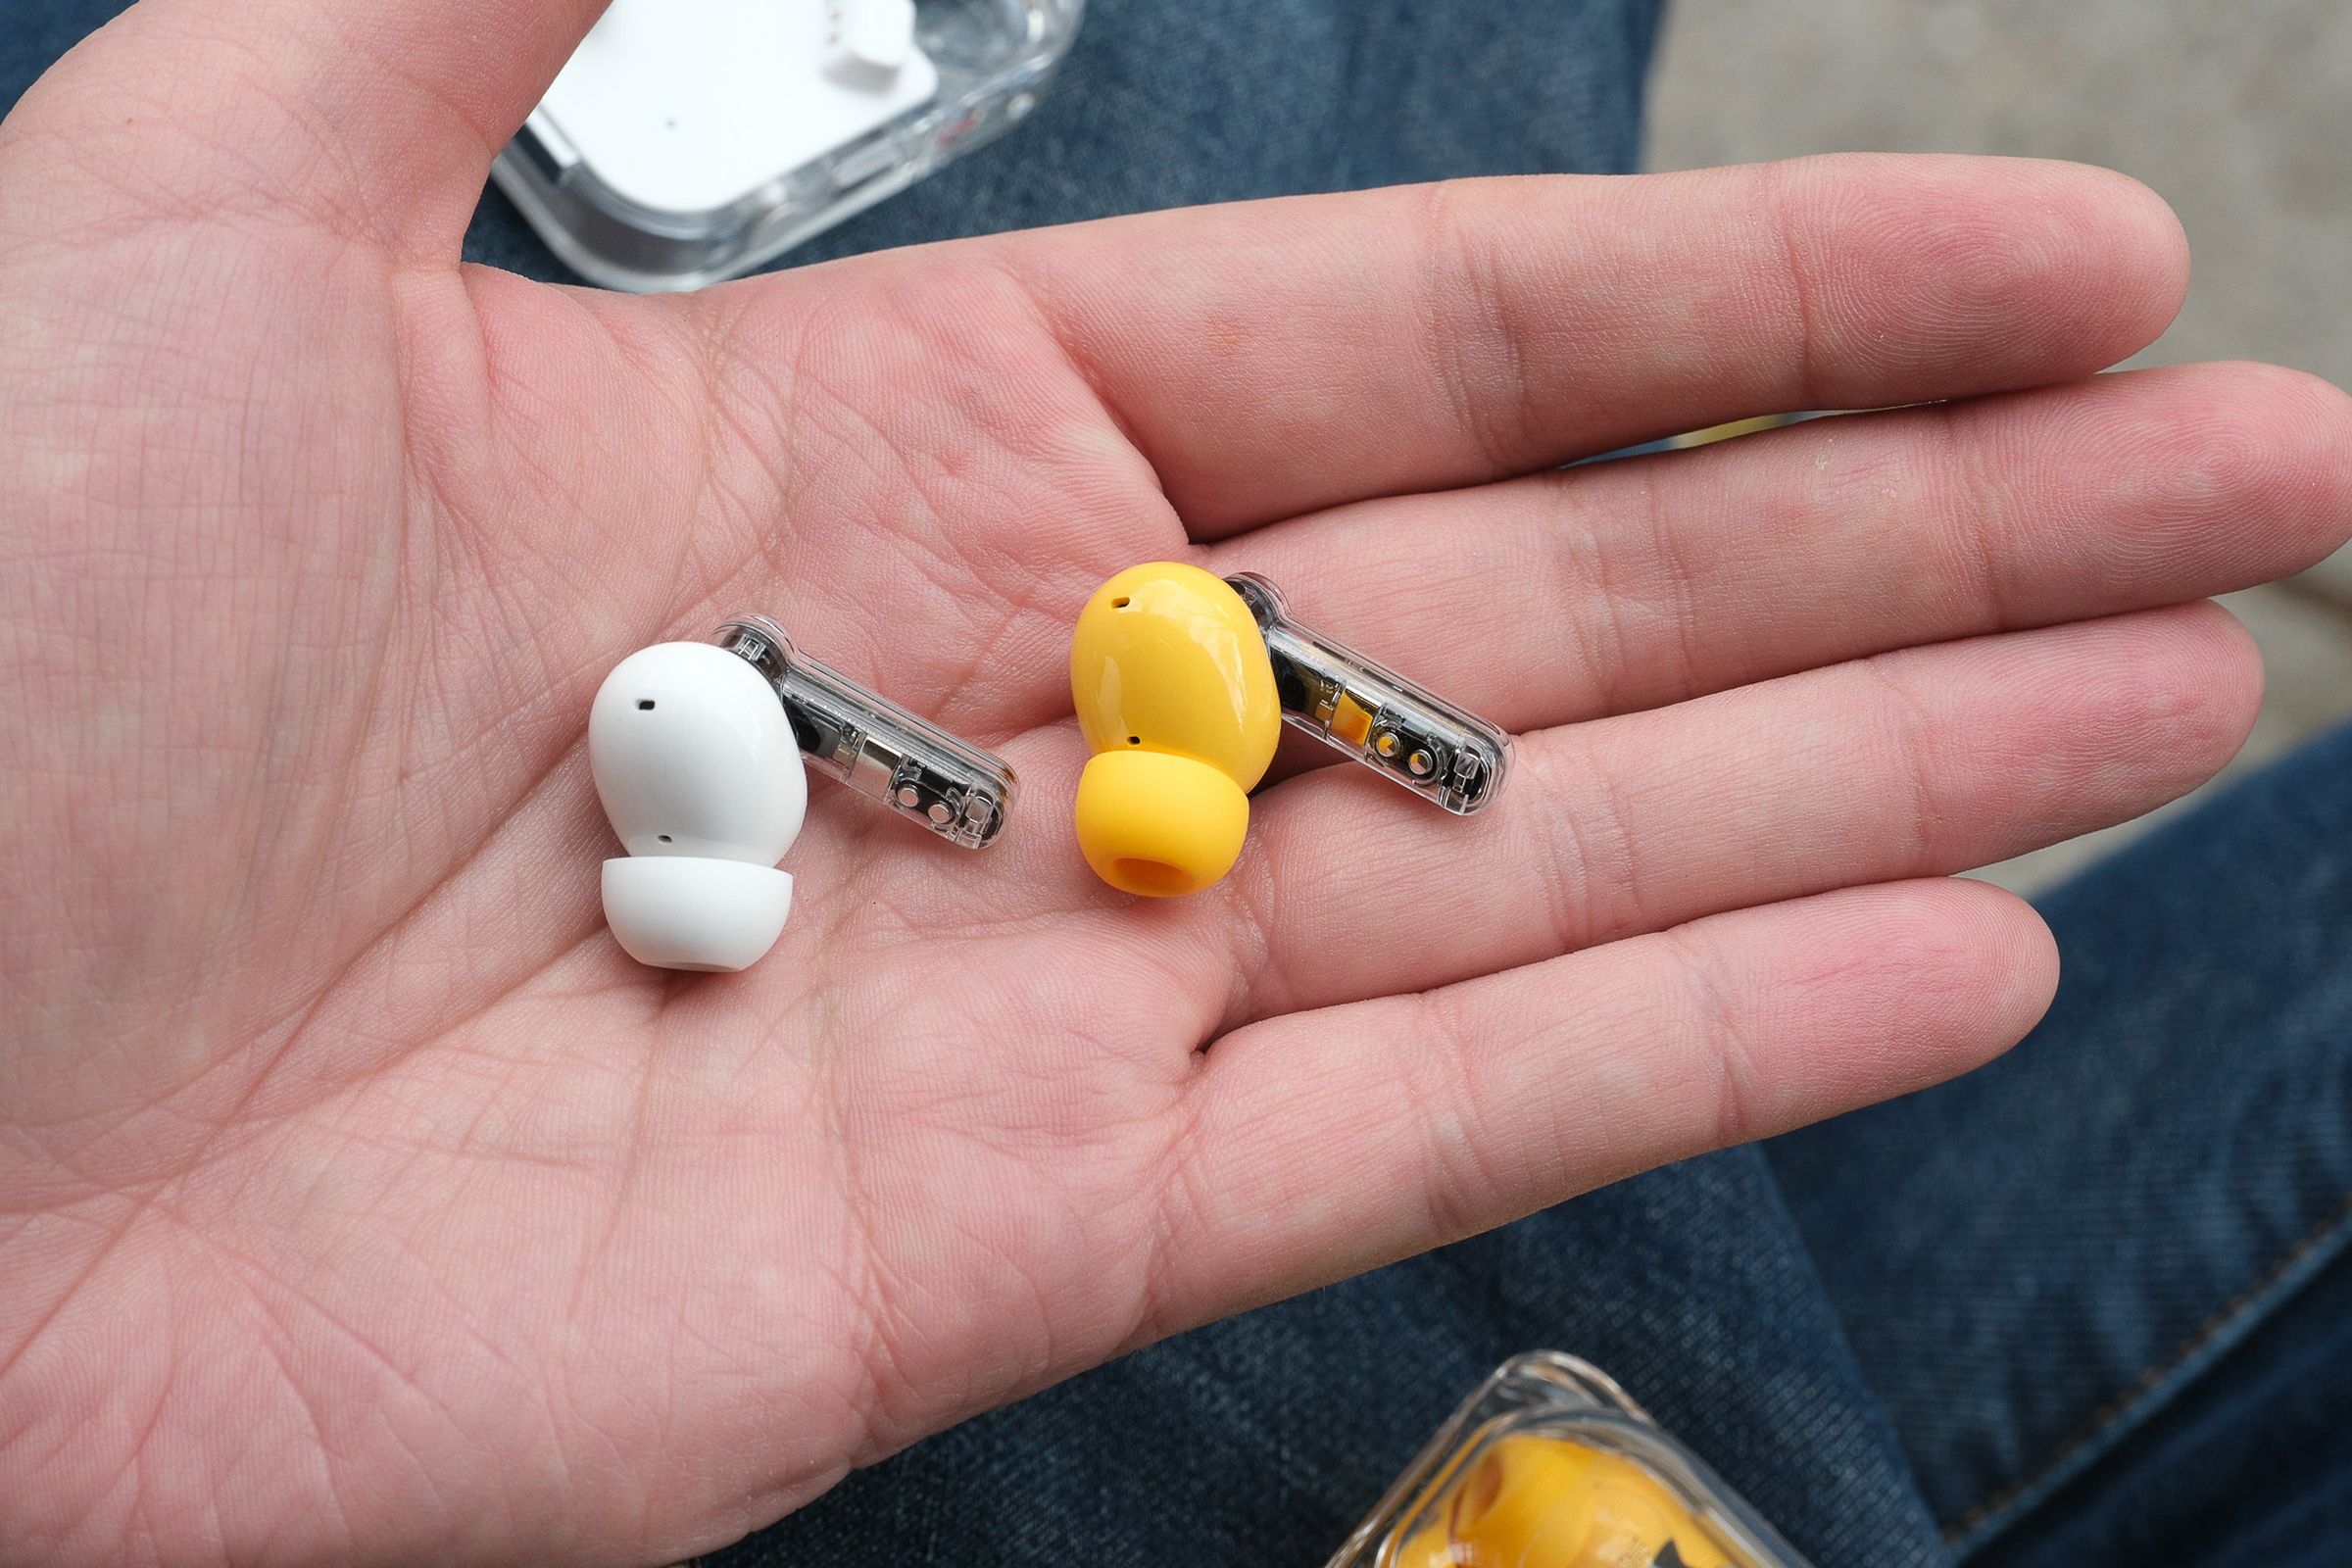 A photo of Nothing’s Ear and Ear (a) earbuds side by side in someone’s palm.